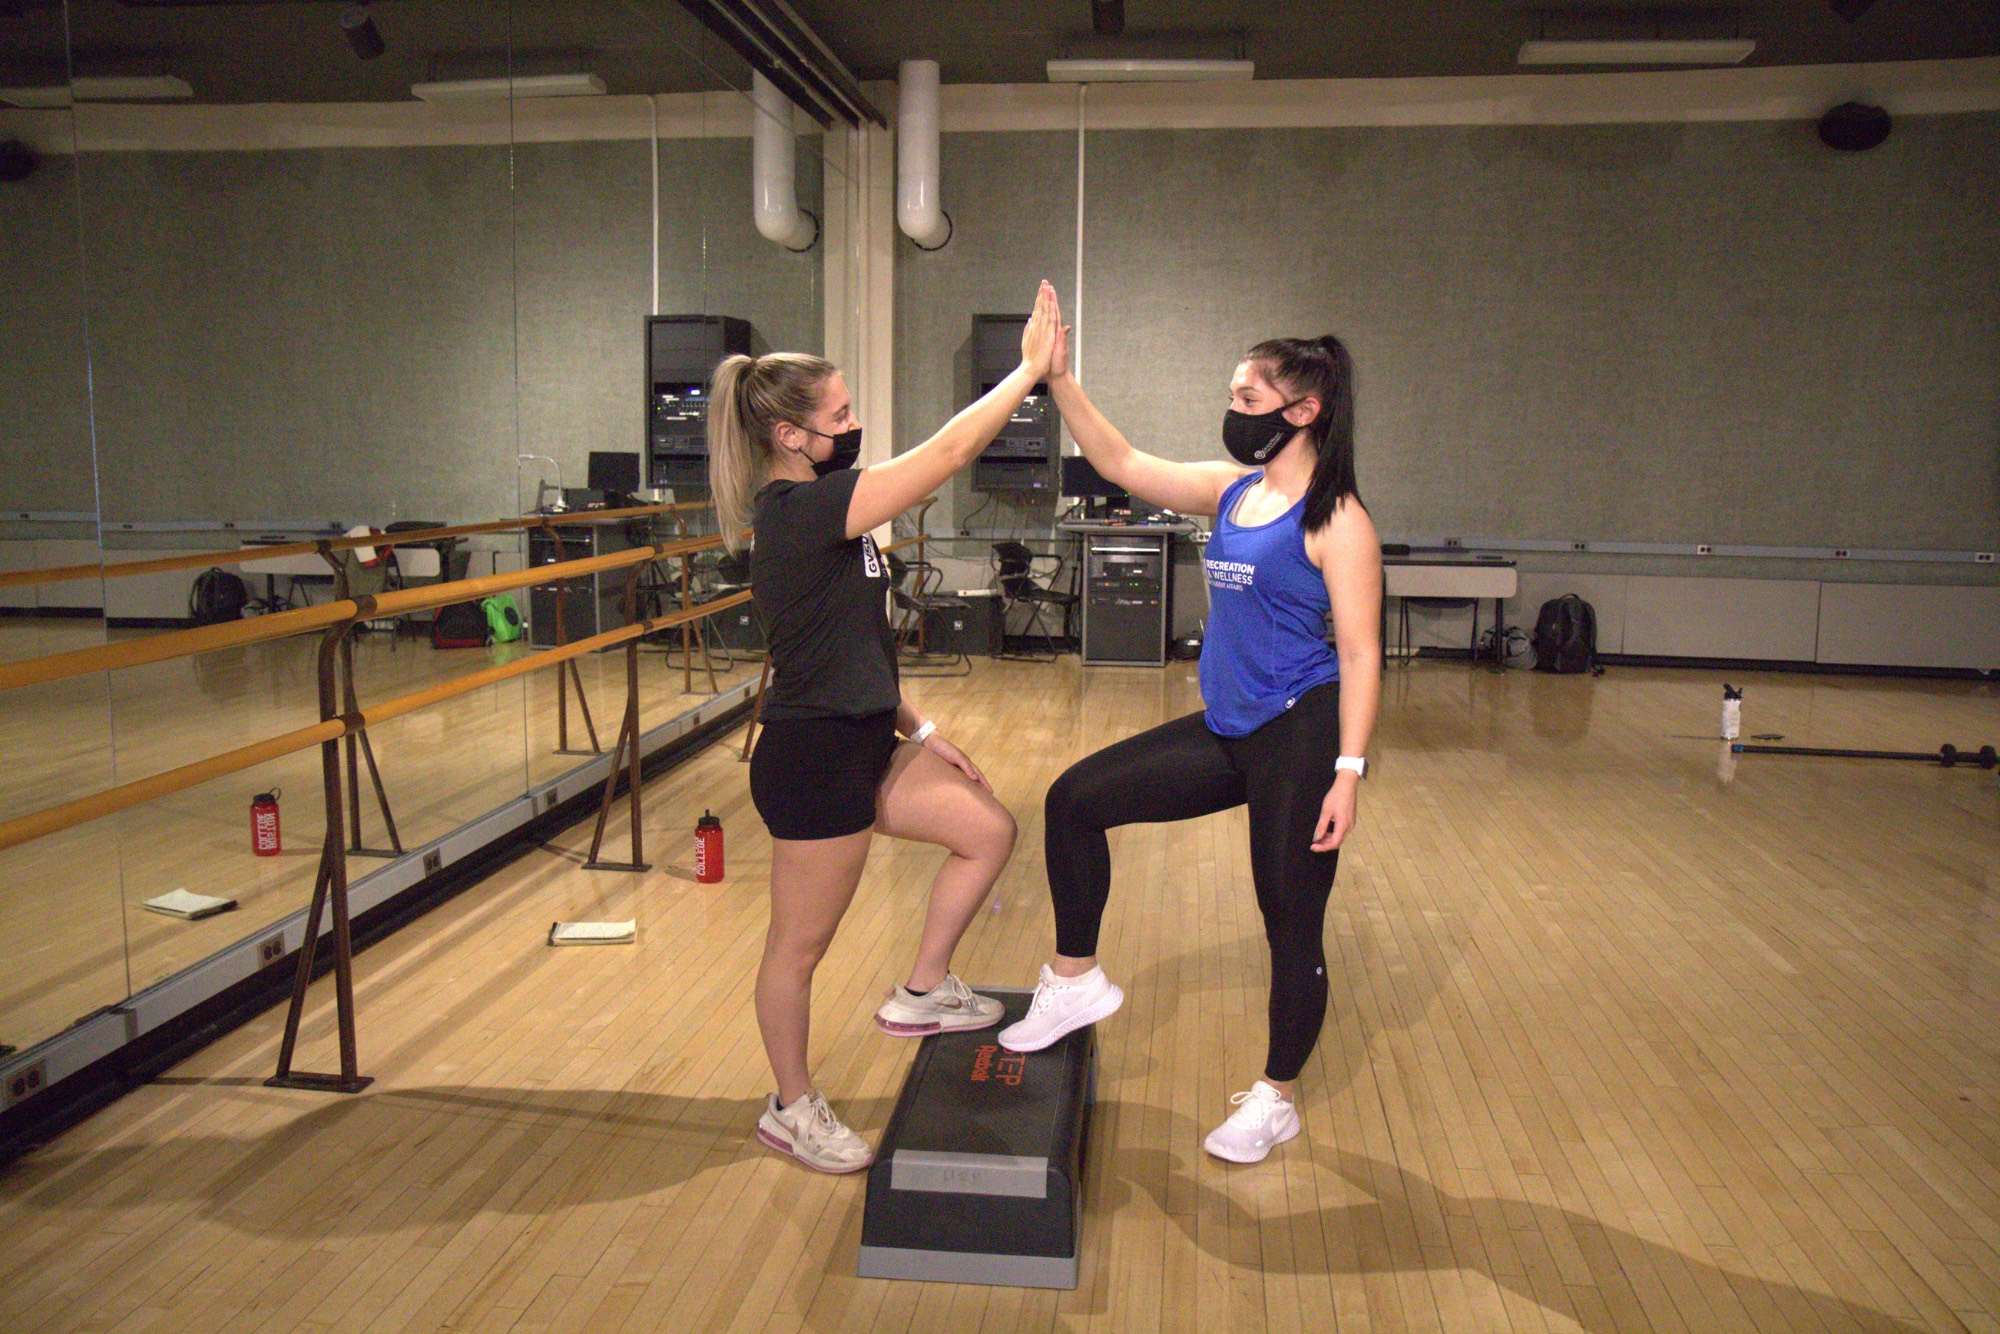 Student and Instructor standing together with their foot on a step high fiving